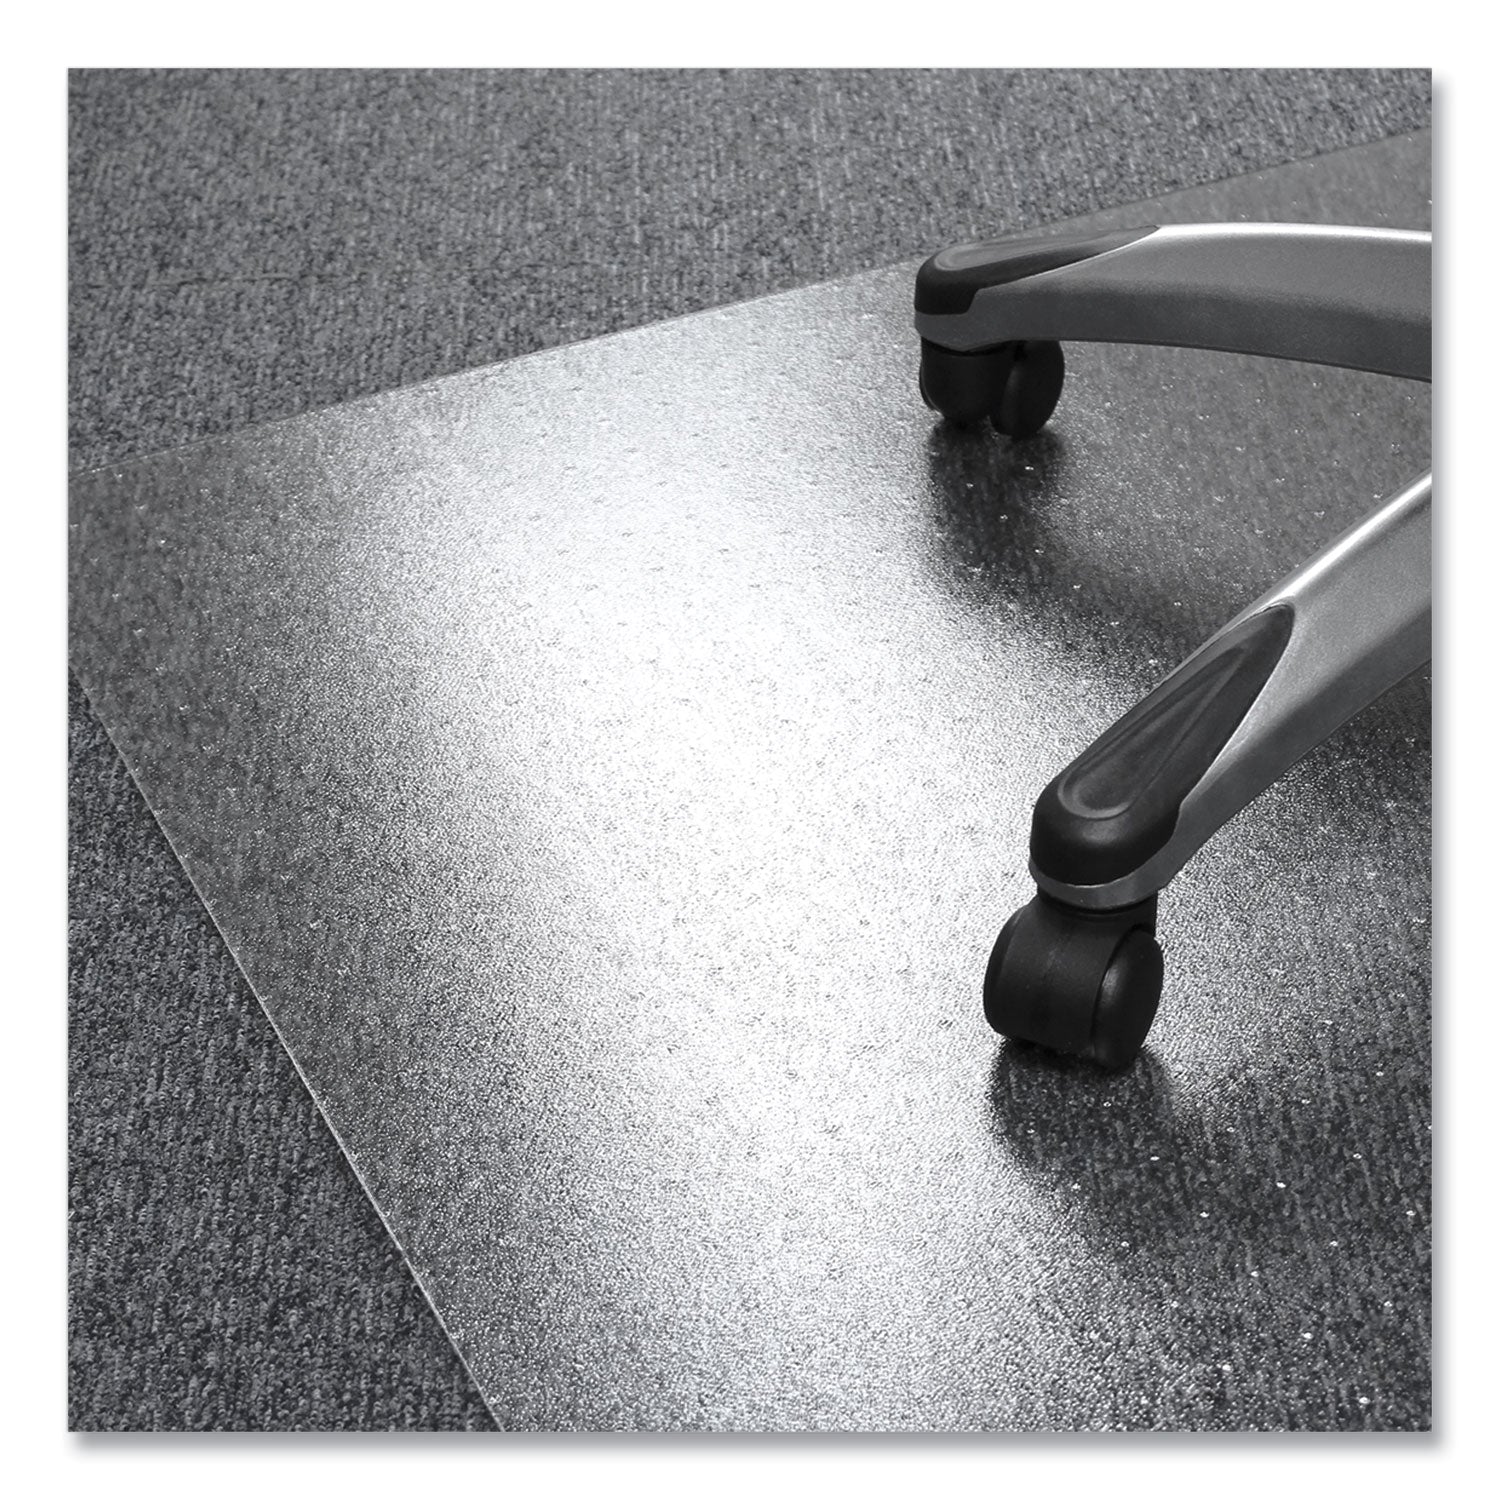 cleartex-ultimat-xxl-polycarb-square-office-mat-for-carpets-59-x-79-clear_flr1115020023er - 4